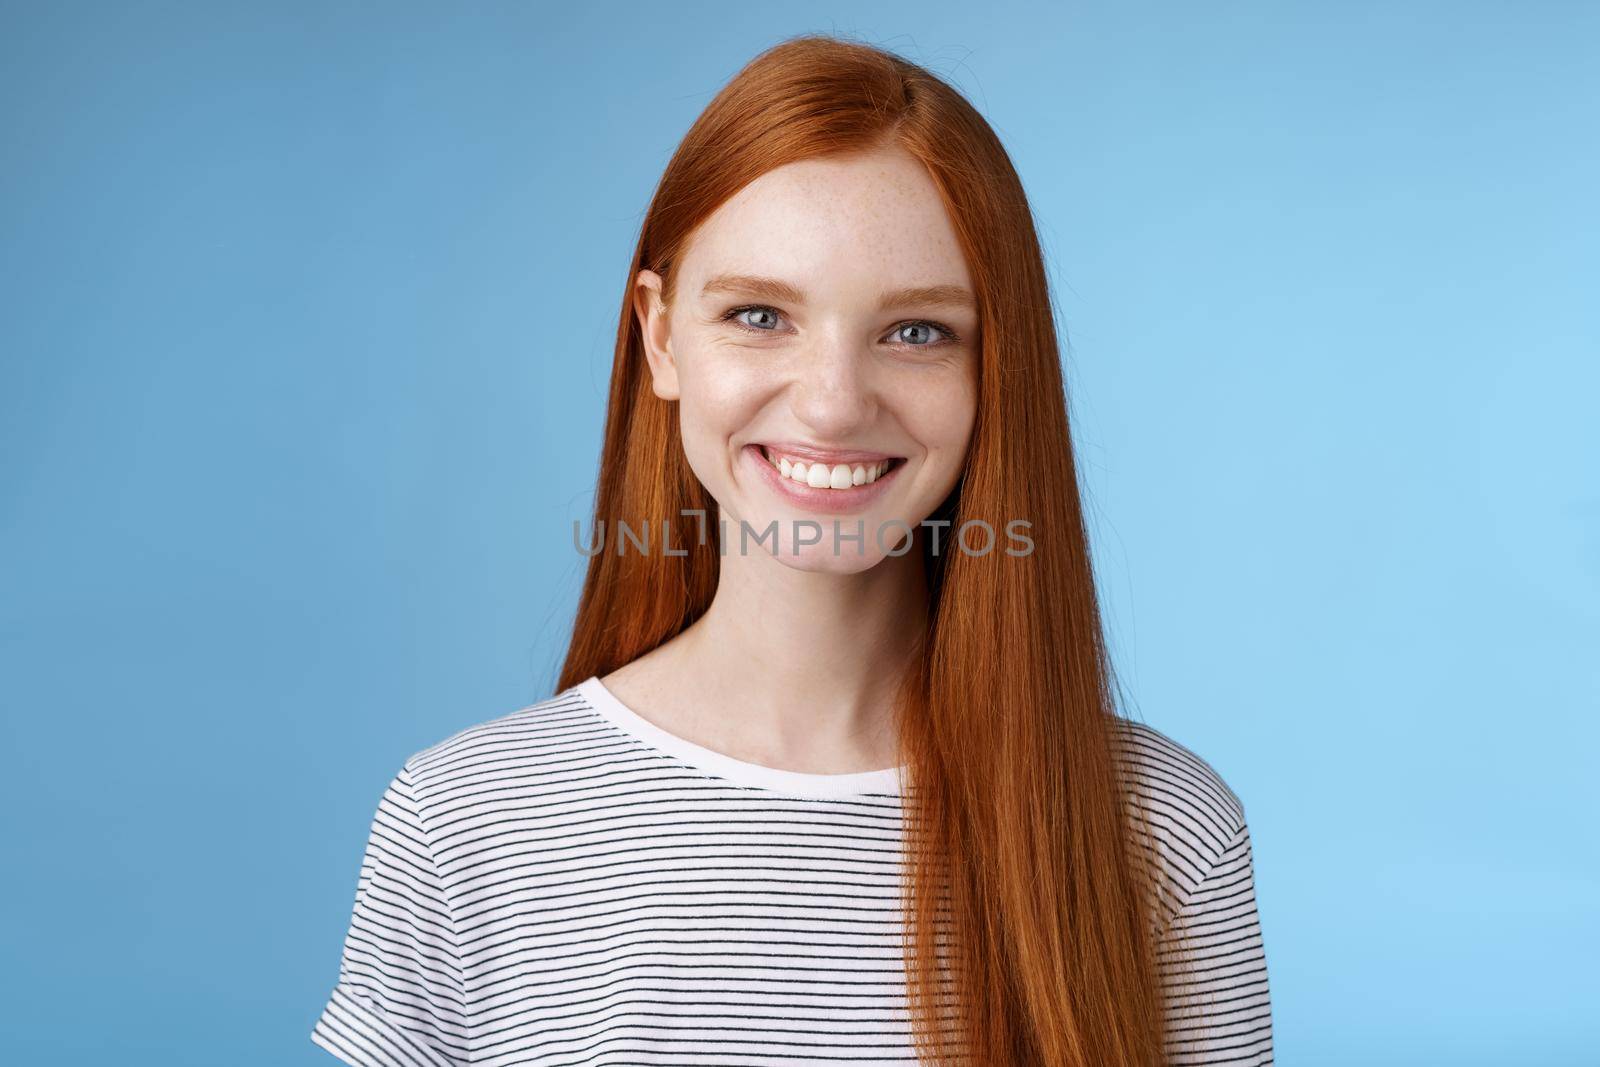 Pleasant reliable sincere good-looking redhead female freelancer college student make confident professional impression smiling broadly assertive helpful standing blue background self-assured.